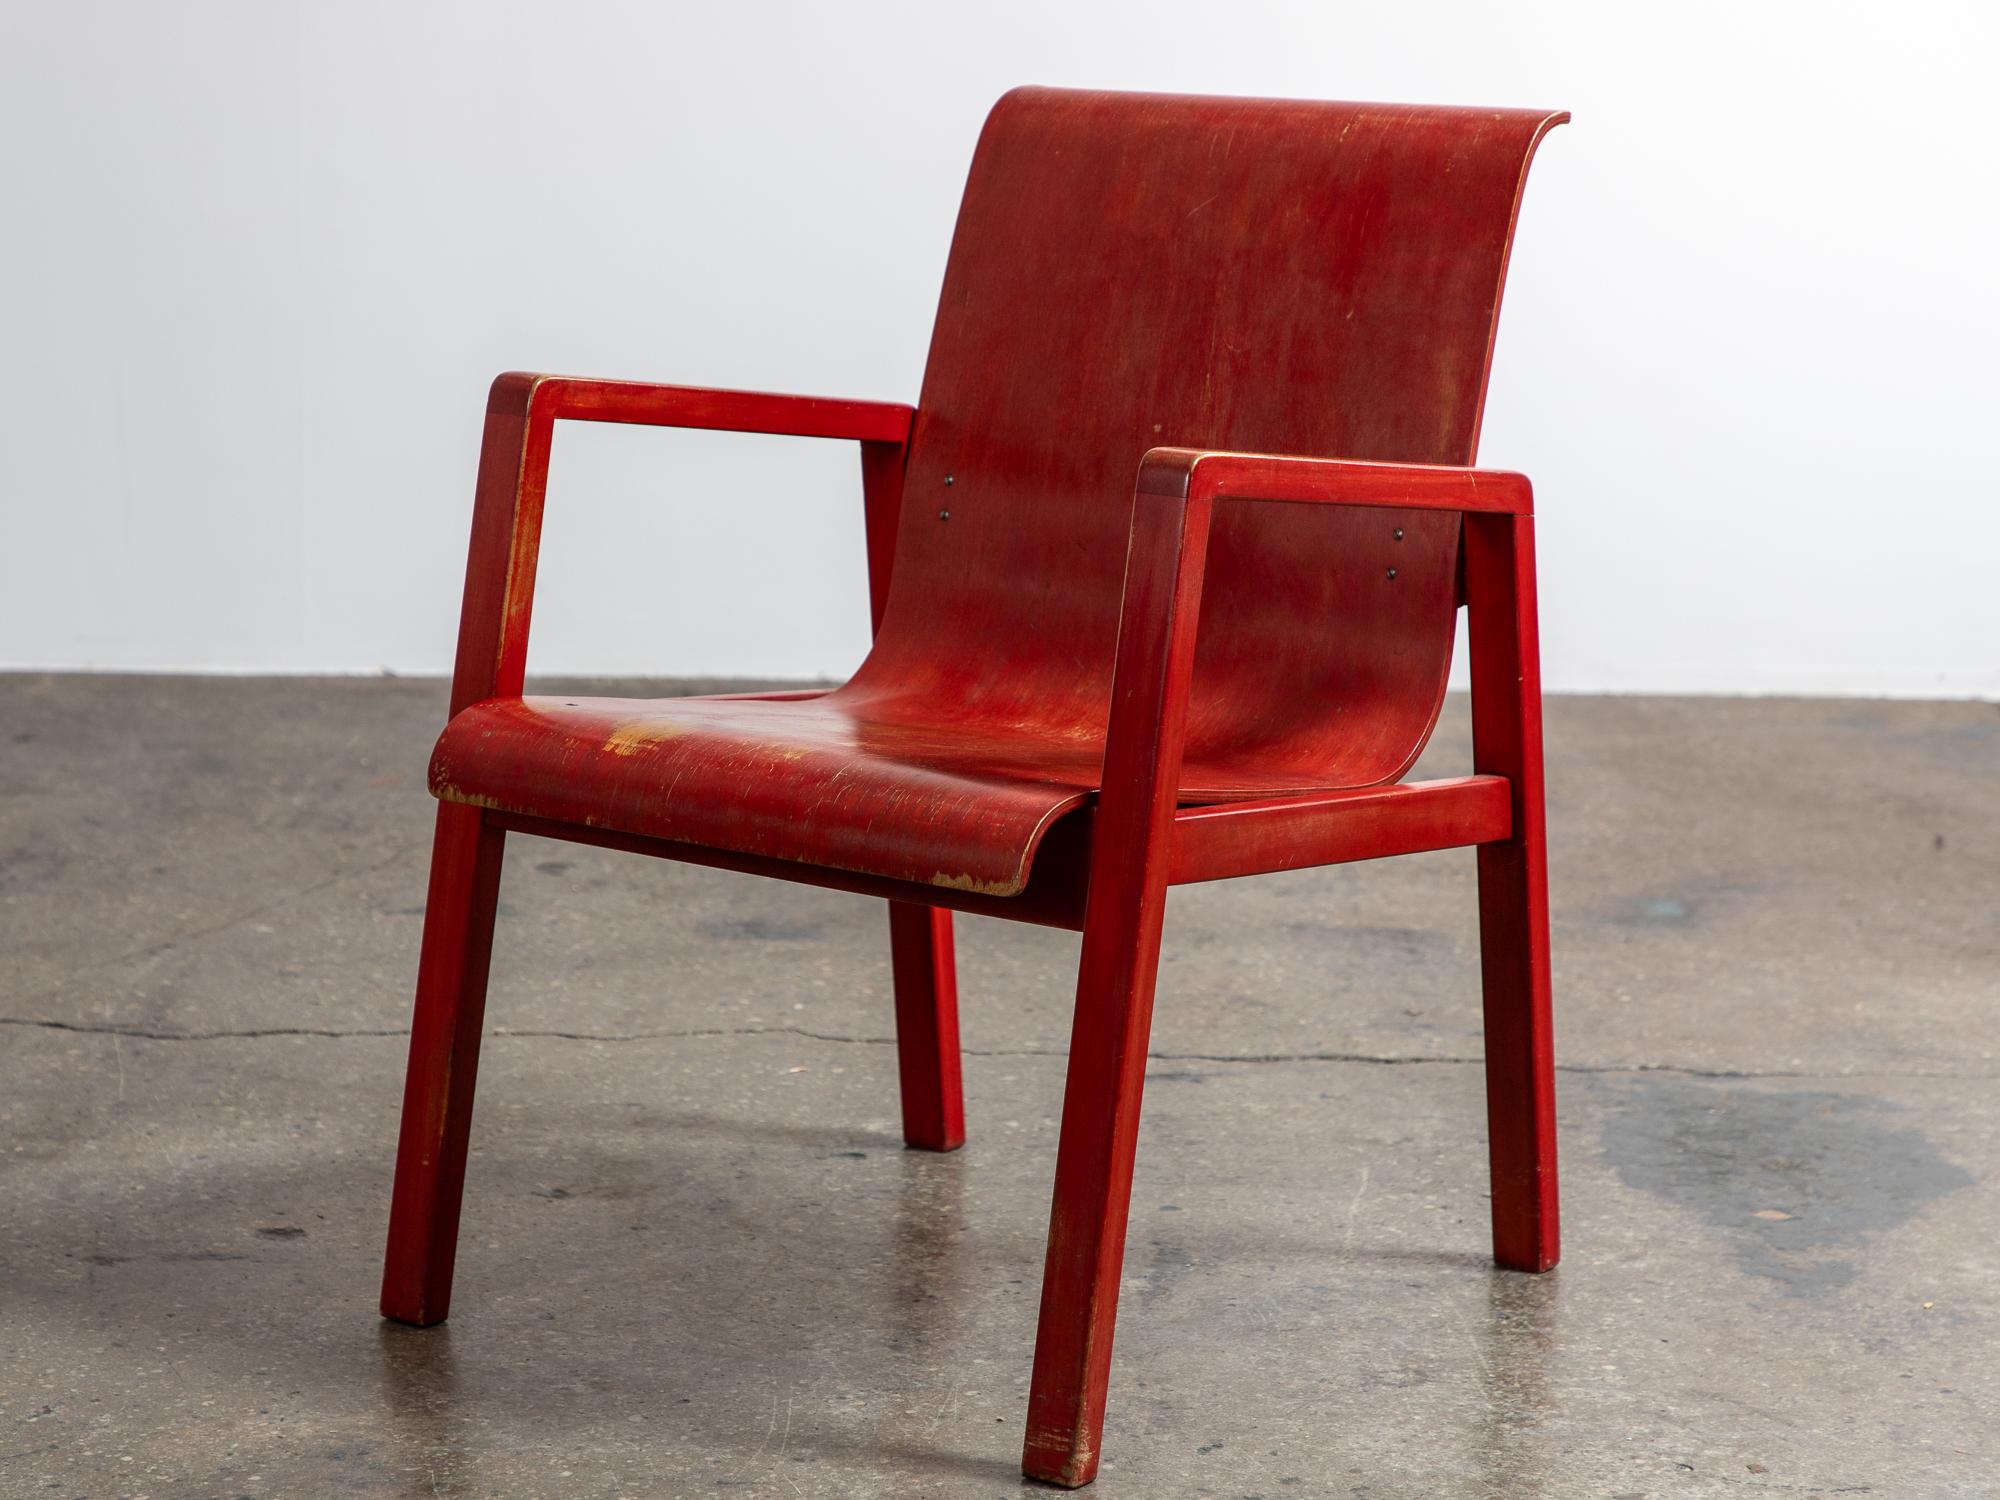 A striking Model 403 Hallway Chair in red lacquer finish, designed by Alvar Aalto for the Paimio Sanitorium, later issued by Finmar. The armchair showcases a fluid design, with a gracefully curved plywood seat and back, supported by an steam-bent